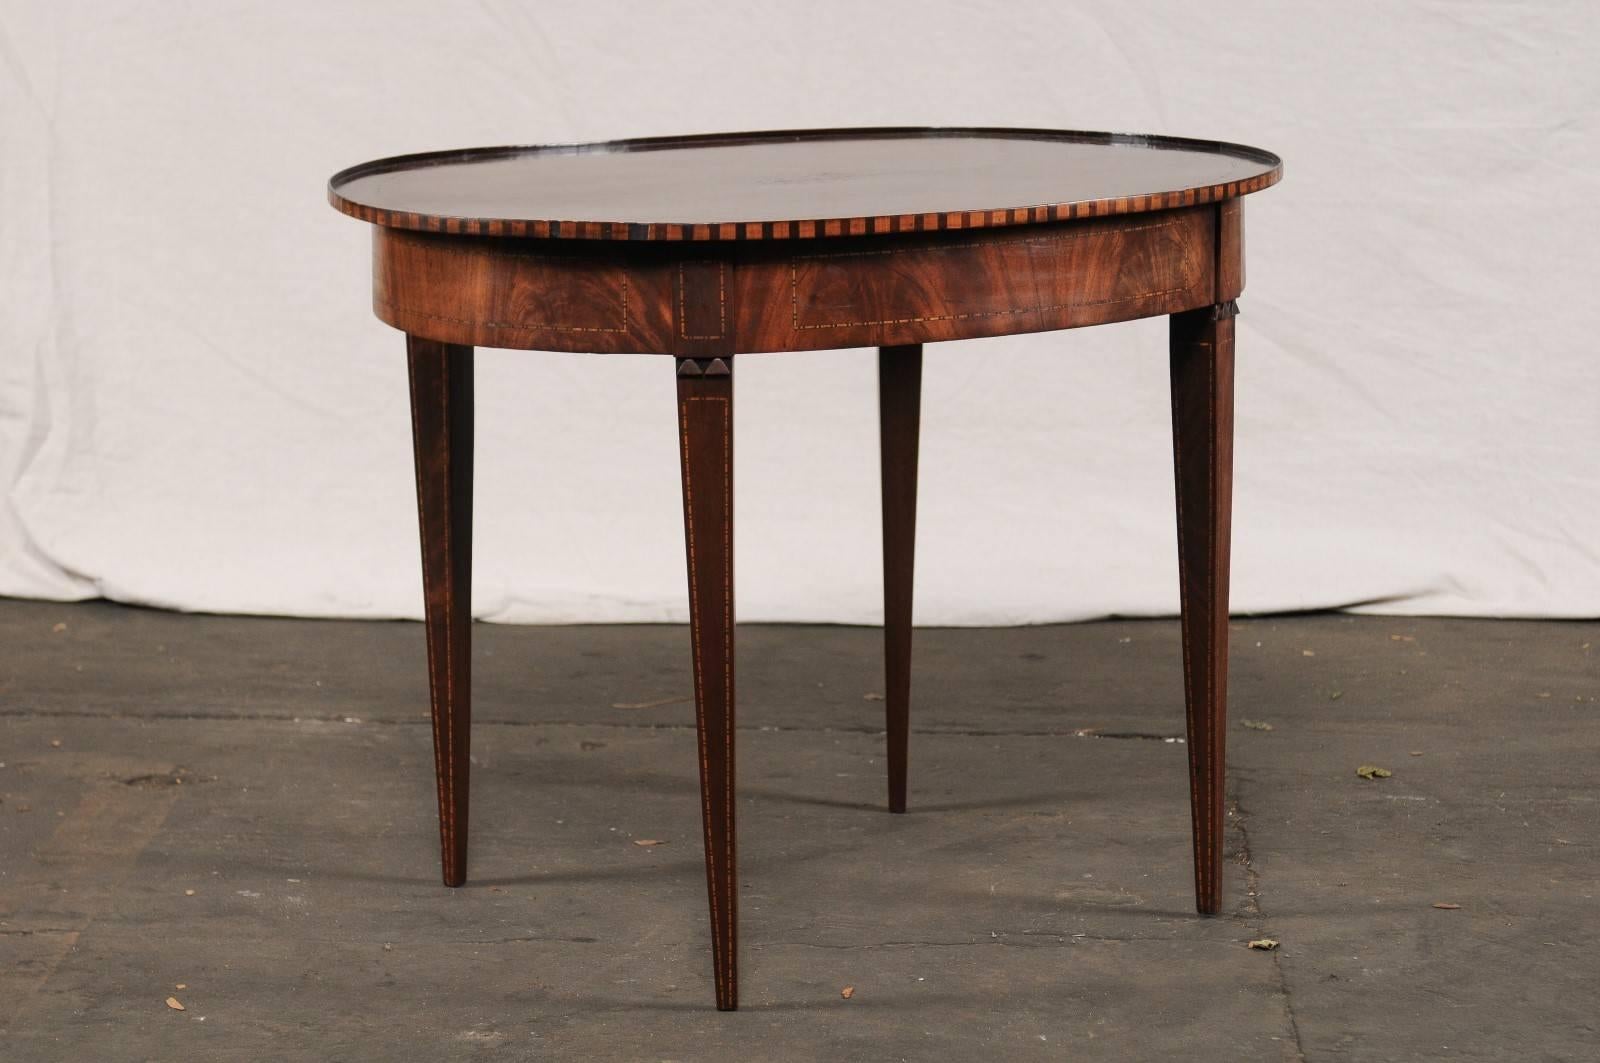 19th century neoclassical inlaid mahogany oval table, great patina and color.